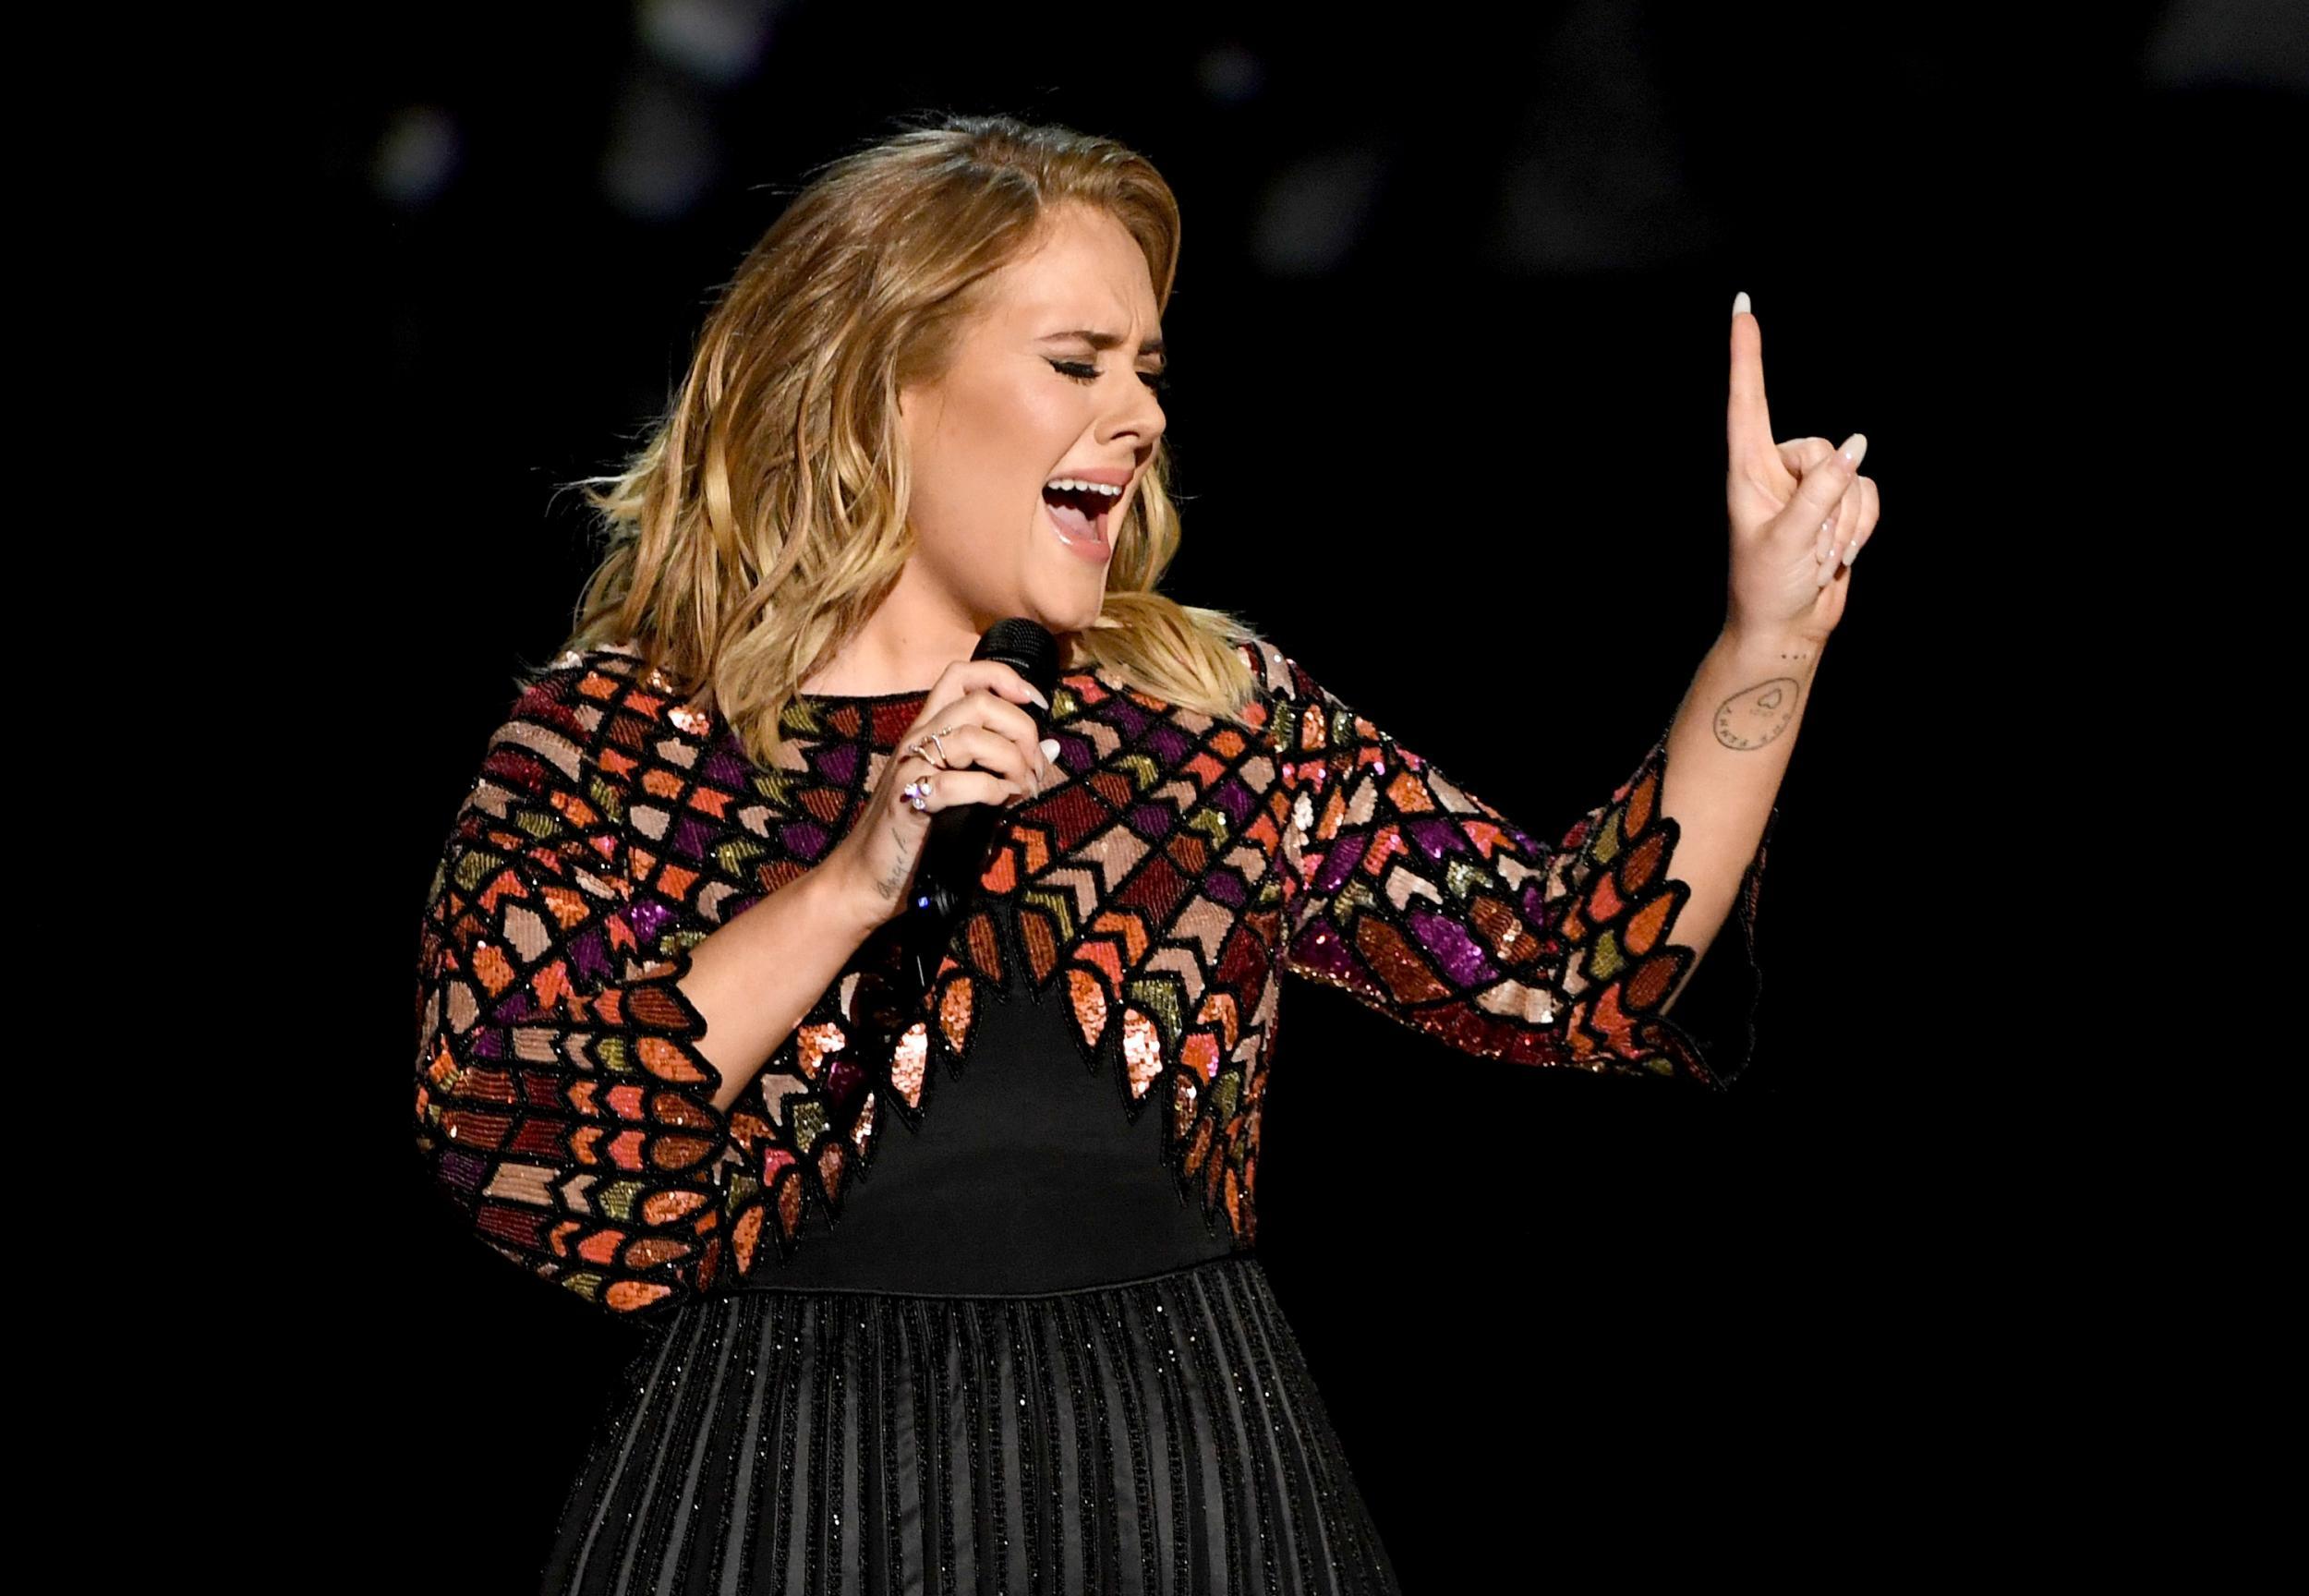 Adele scolds security guard after catching him telling fans to sit down at Melbourne gig - The Independent